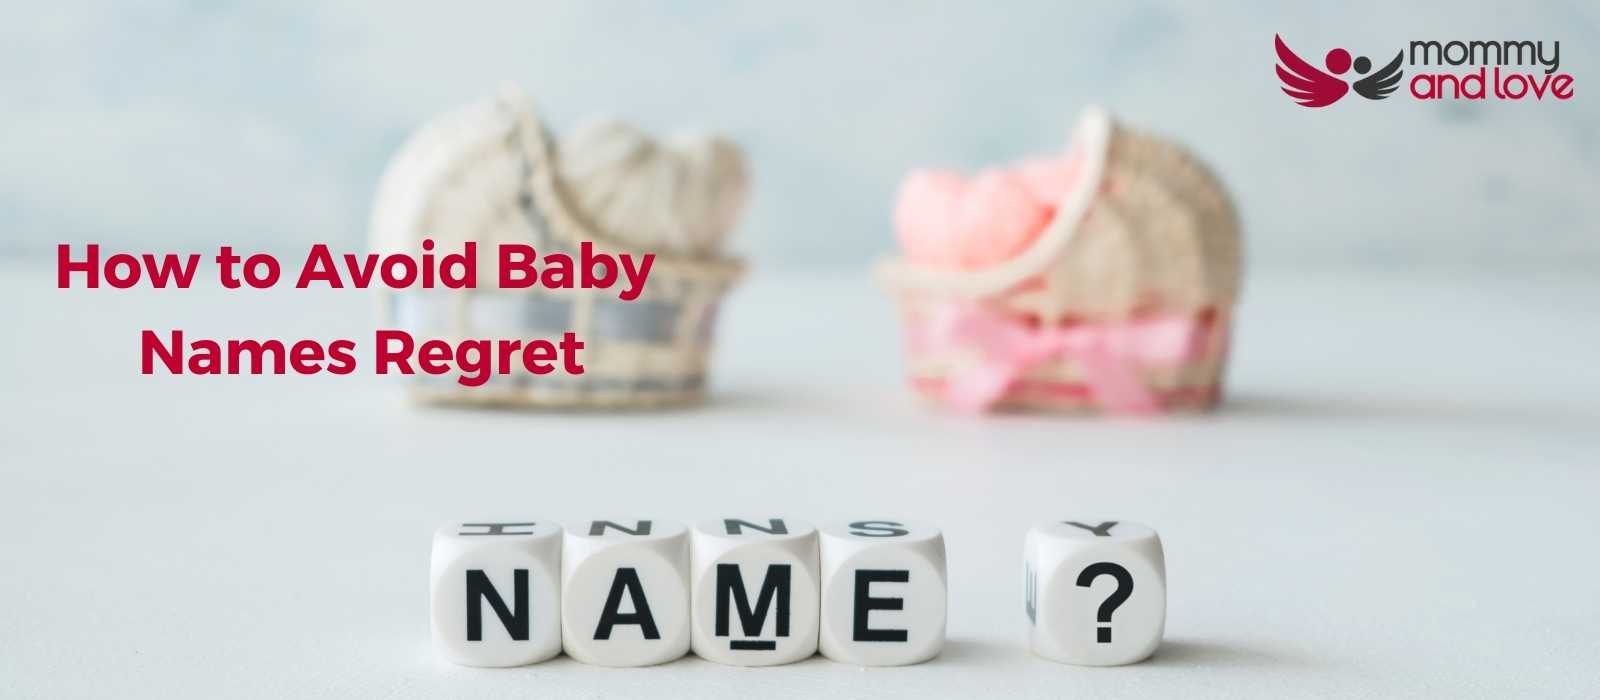 How to Avoid Baby Names Regret